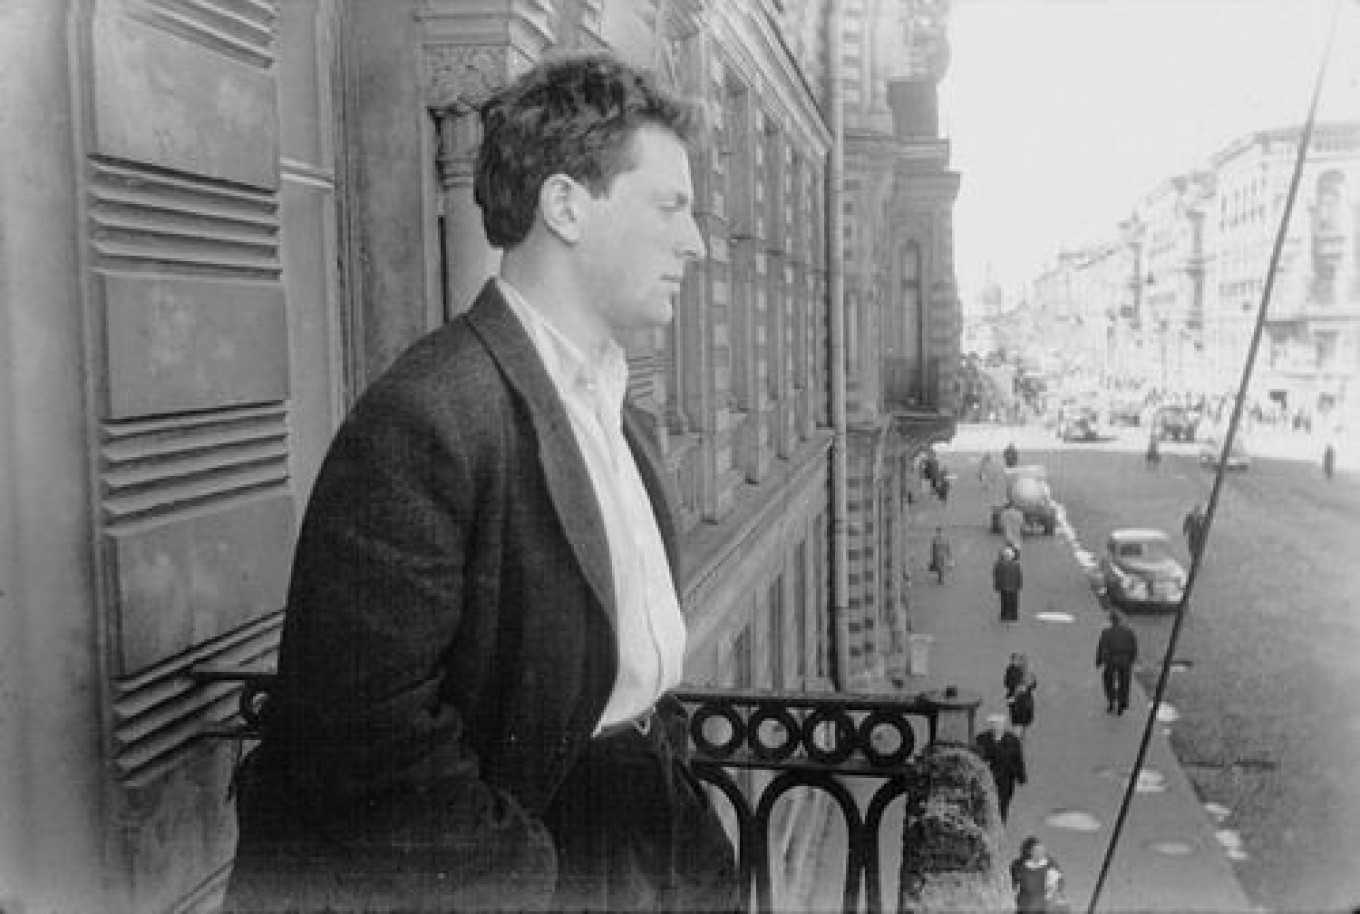  Brodsky on the balcony of the apartment, 1963, photographed by his father, Alexander Brodsky. Courtesy of the Anna Akhmatova Museum at the Fountain House 